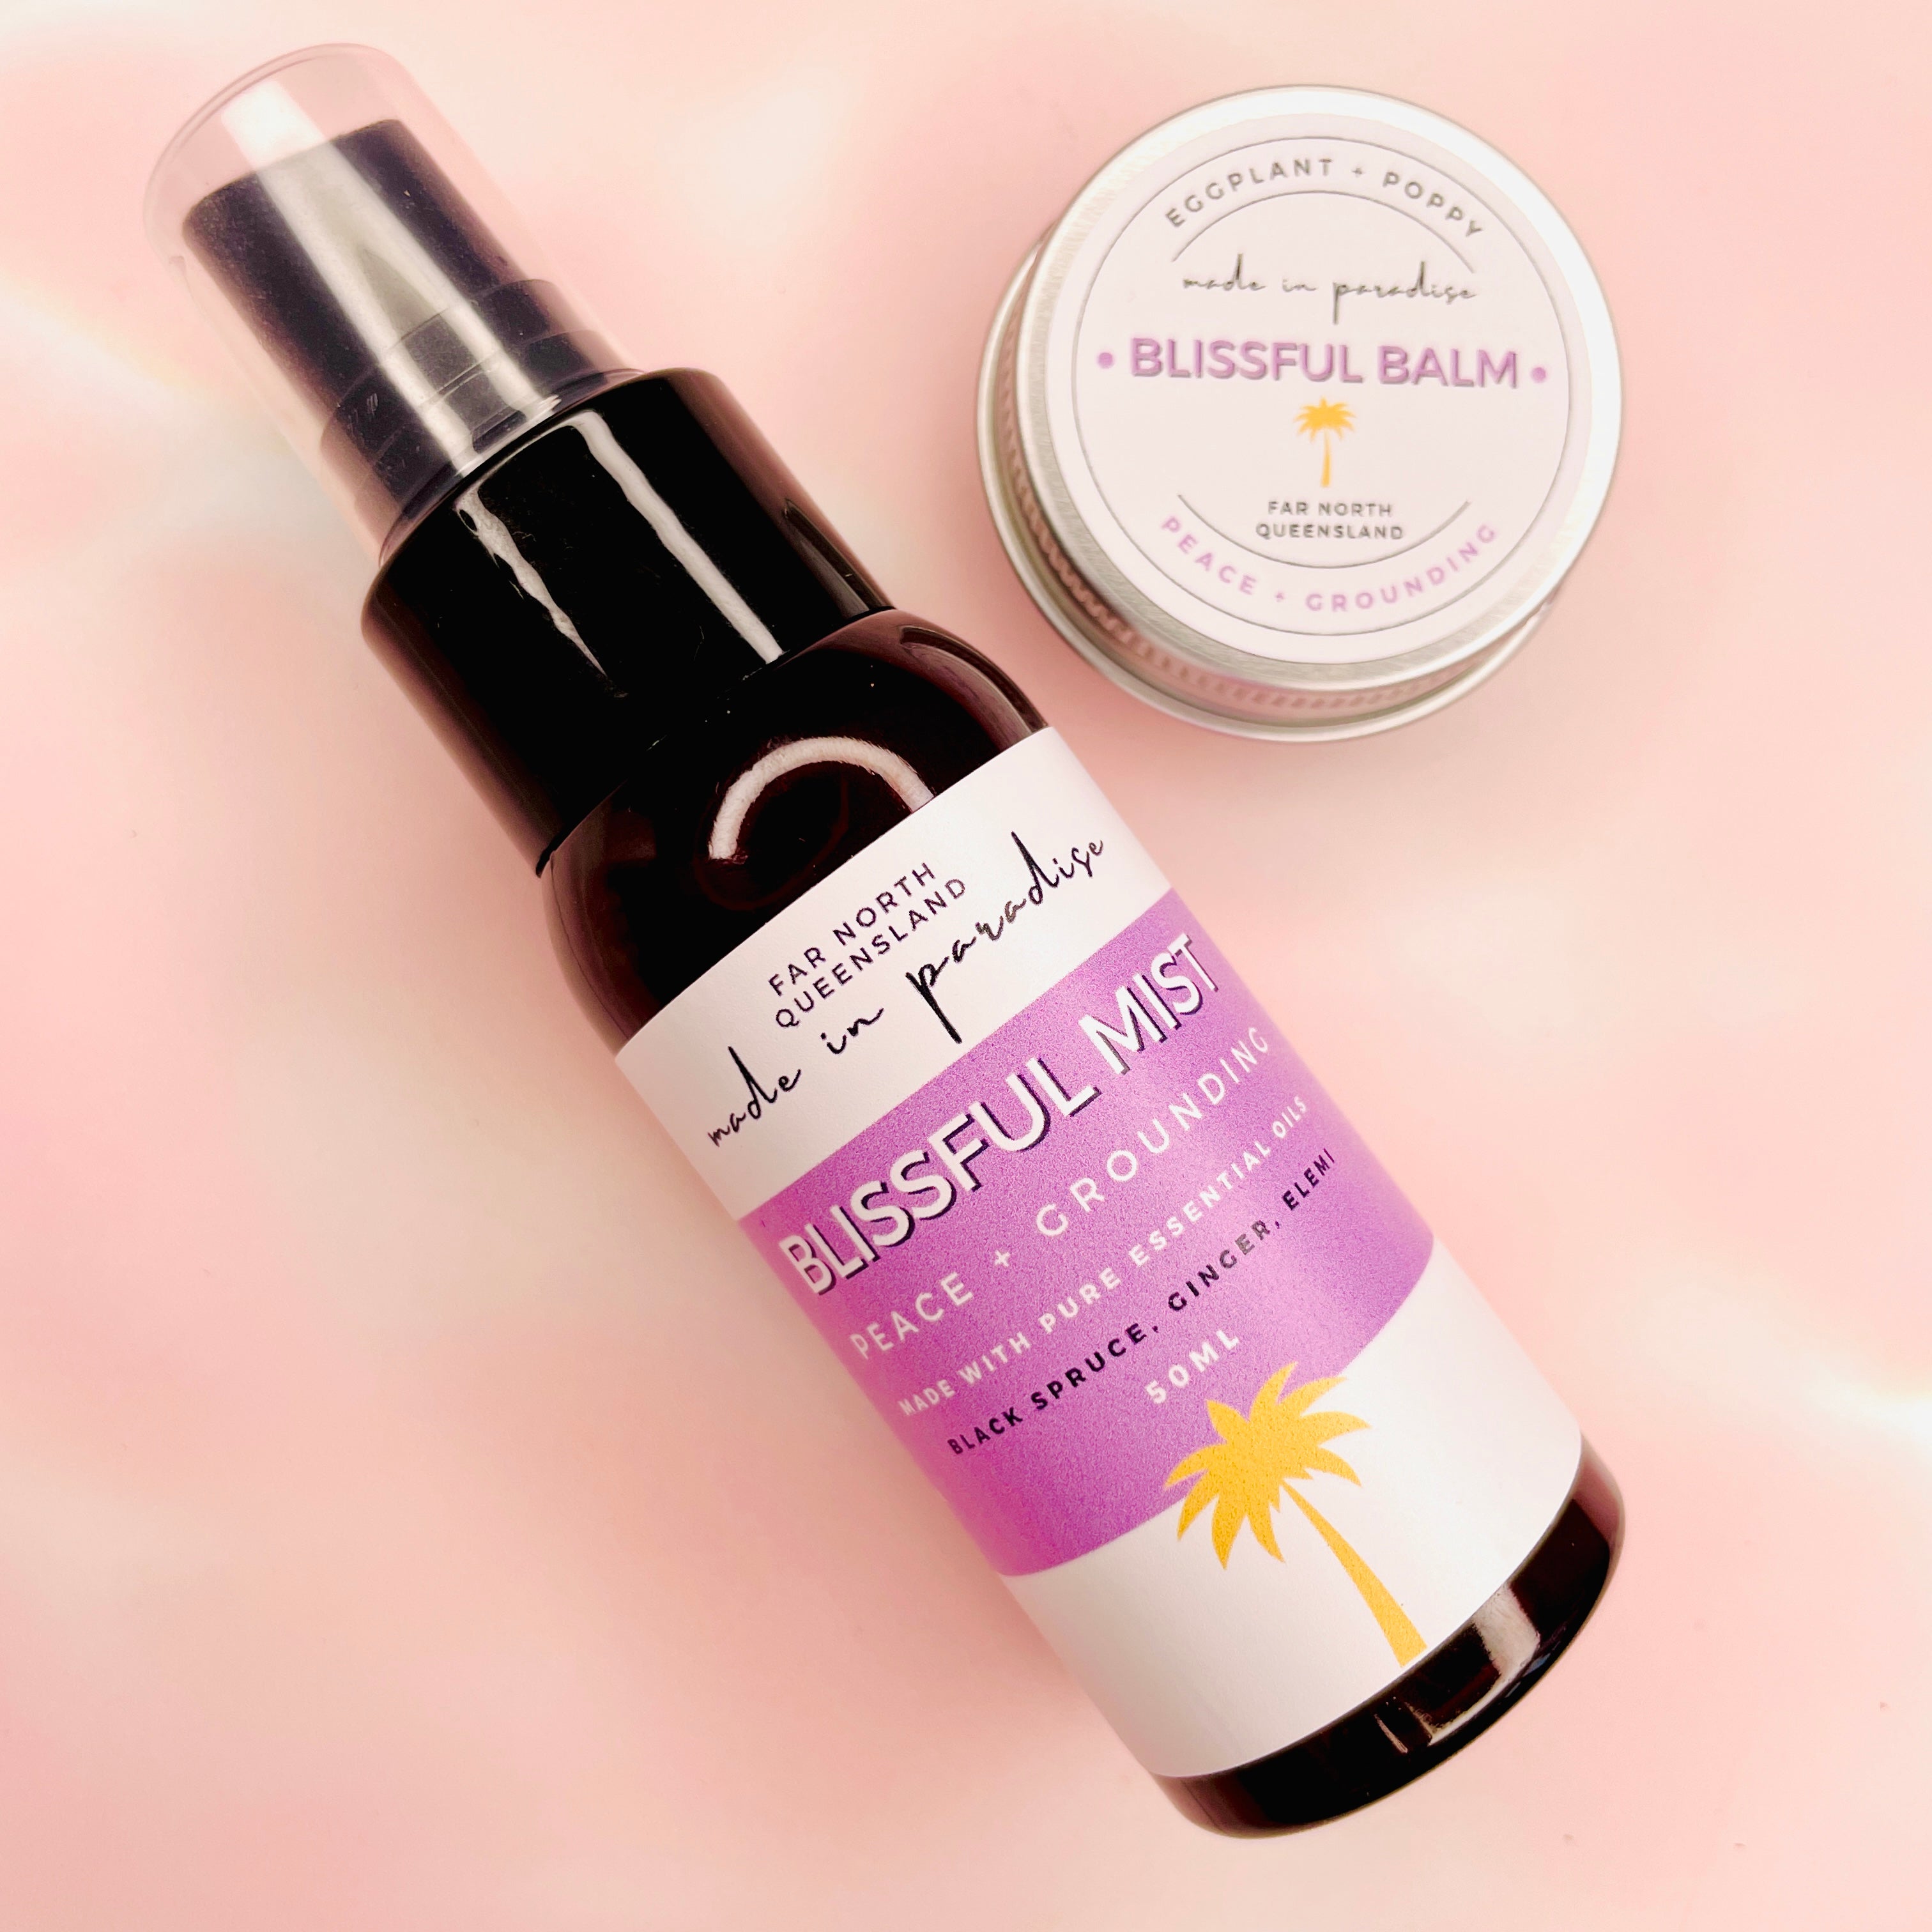 Made In Paradise - Blissful Balm